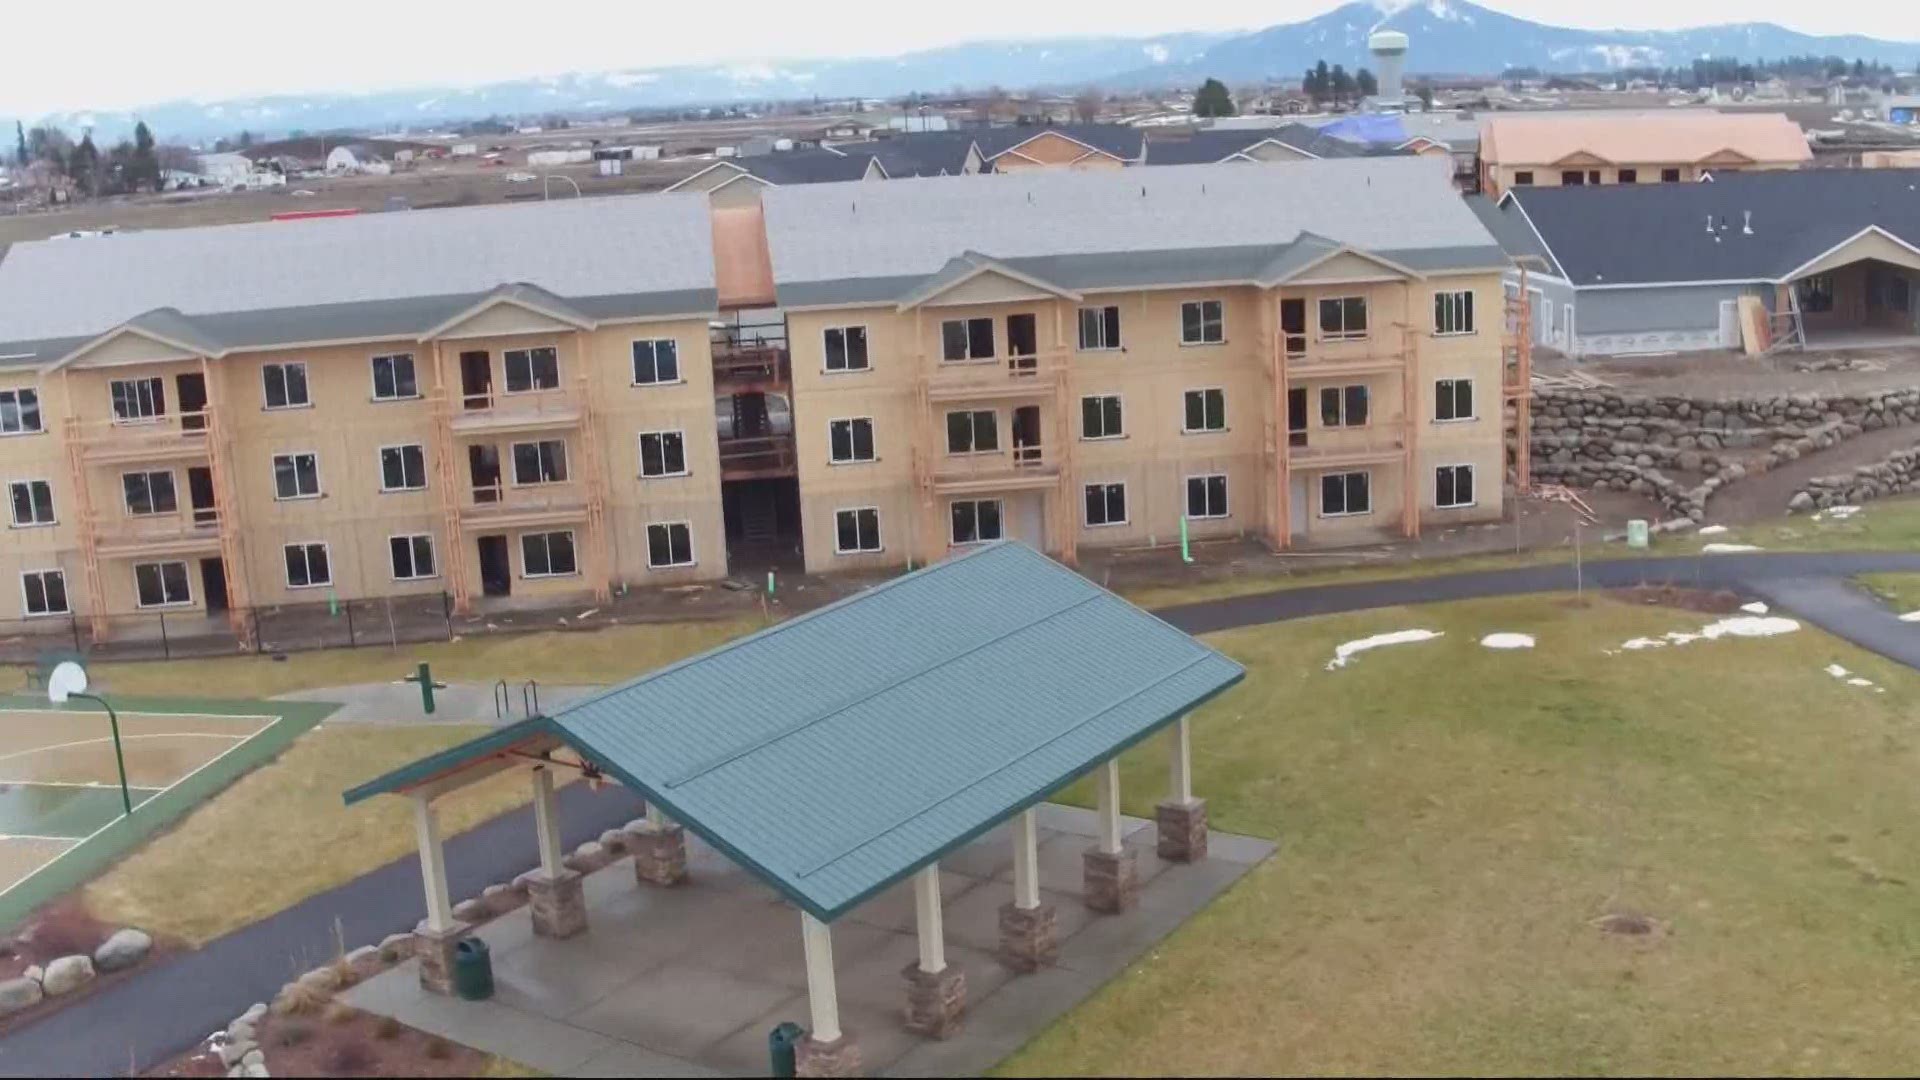 Kootenai County has seen its population growth at a rapid rate in the last three decades, but some long-time residents are worried about the rapid growth.